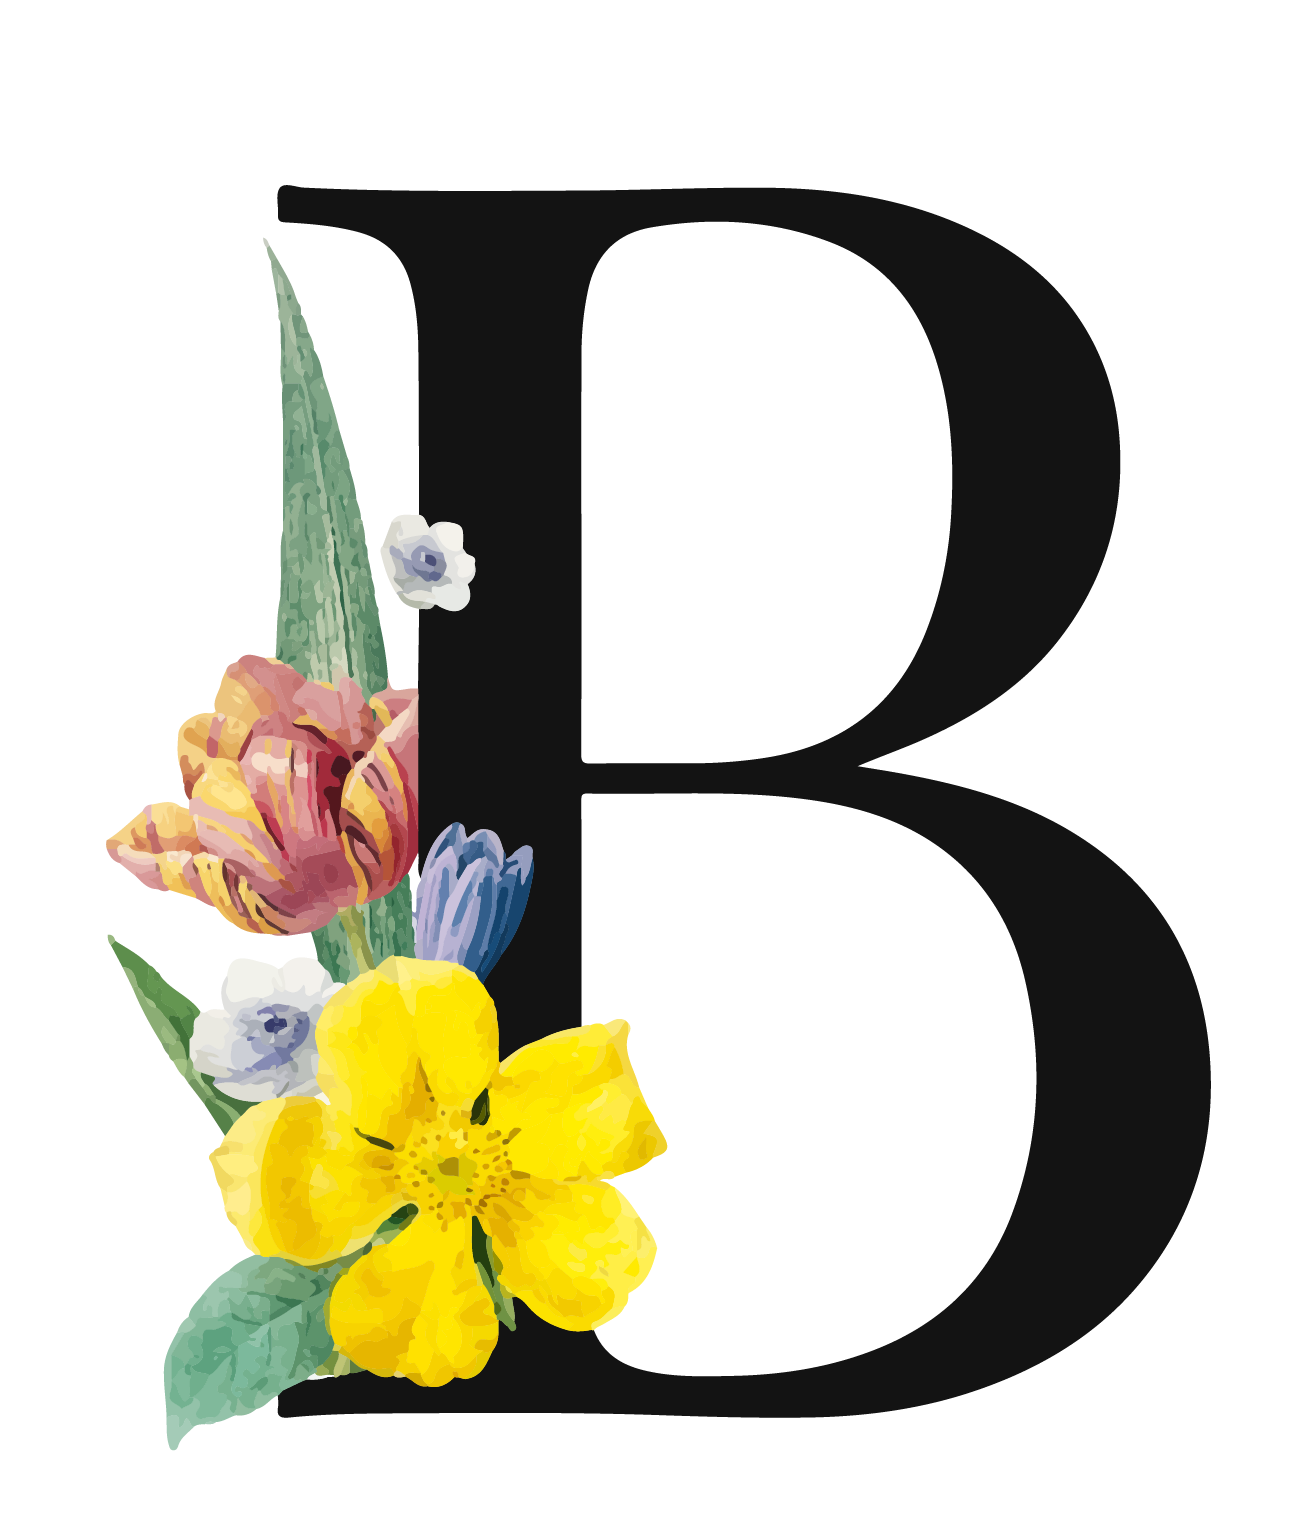 B Letter PNG HD and HQ Image